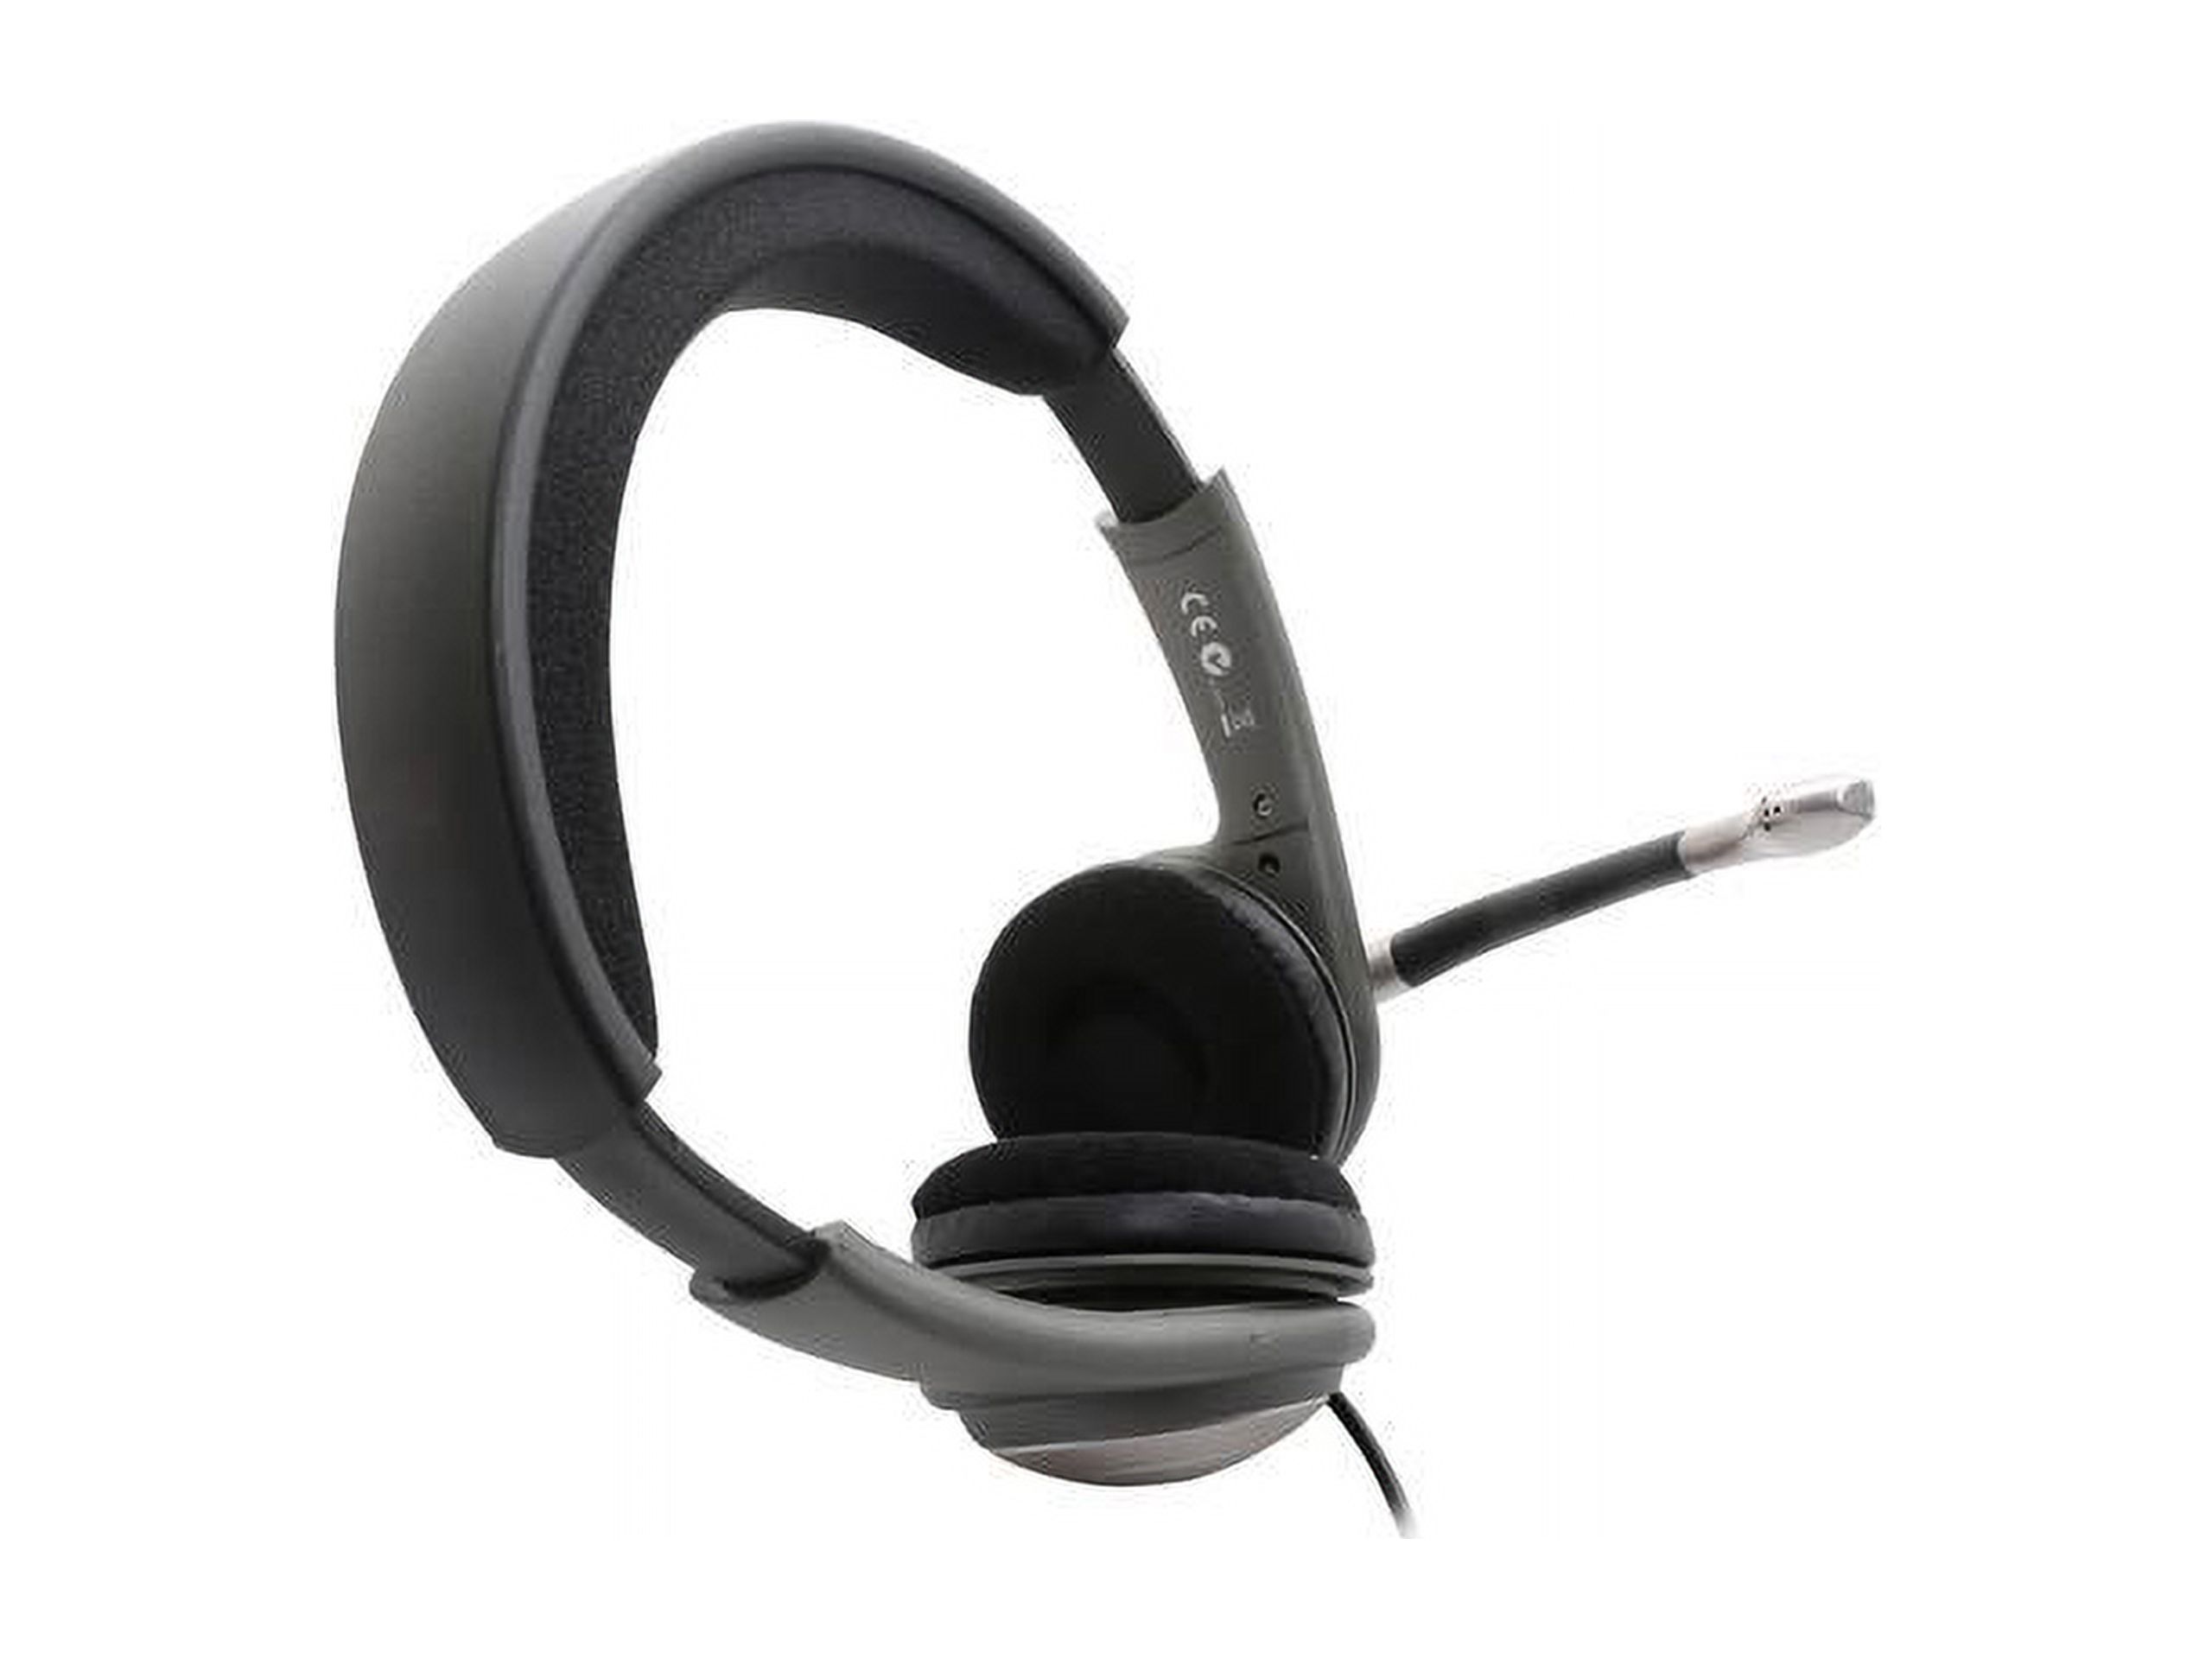 SYBA Multimedia Connectland Headset - Stereo - USB, Mini-phone (3.5mm) - Wired - 32 Ohm - 20 Hz - 20 kHz - Over-the-head - Binaural - Ear-cup - image 3 of 5